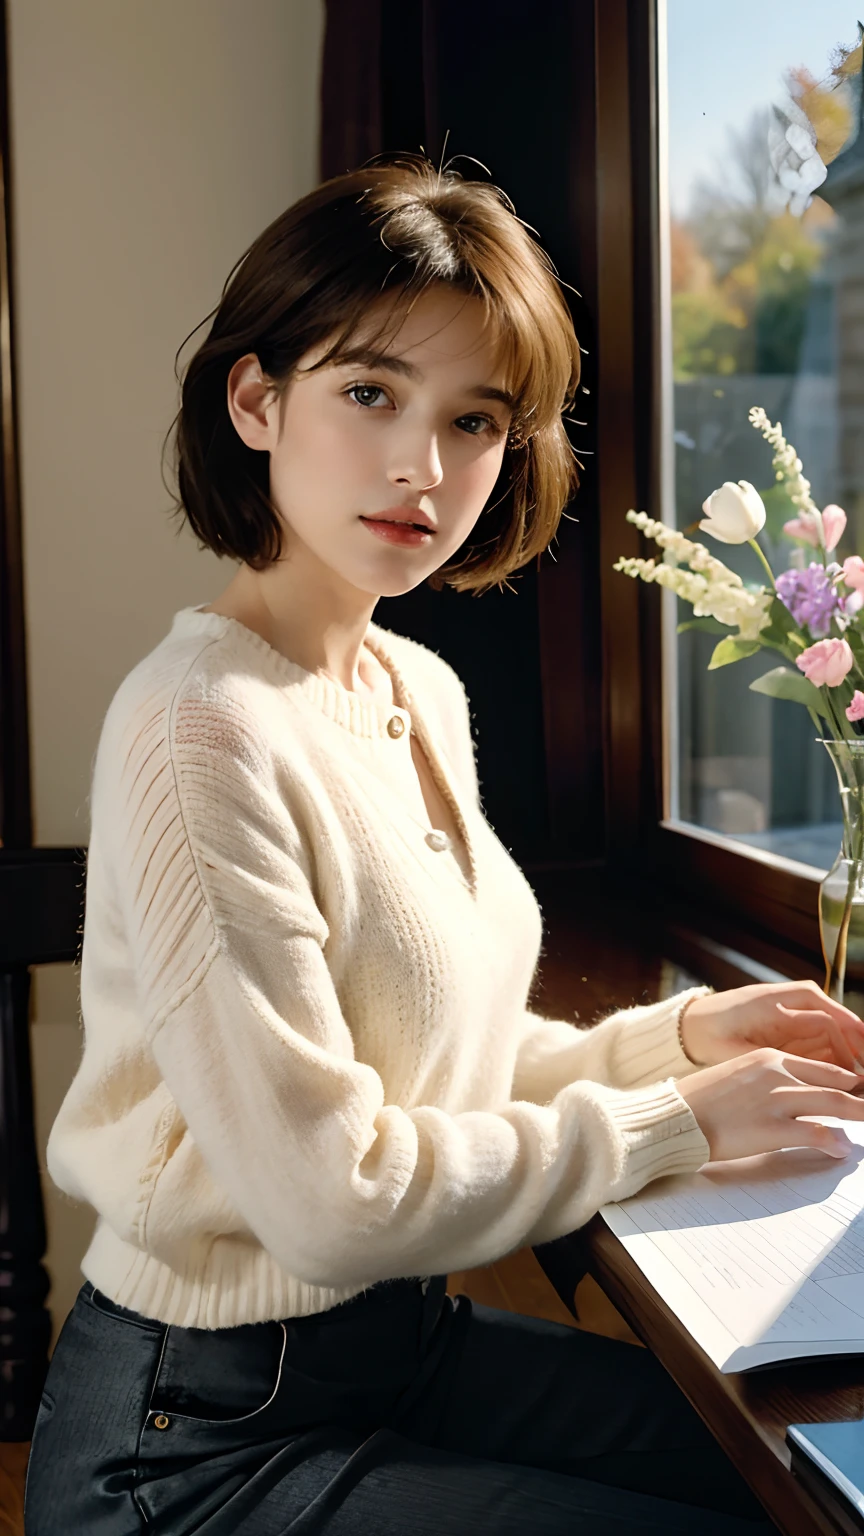 Beautiful and elegant French girl,Twenty-two years old, Actress Sophie Marceau，（This face looks like Sophie Marceau），Short golden-brown hair，A shallow smile,（Blue affectionate eyes）,（Very detailed and perfect facial depiction），Sit in the antique study，Side view，looking lovingly at the viewer，A hint of melancholy，Milky white sweater，Black Capri pants，Study desk，vases，hanging lights，The setting sun shines obliquely through the glass windows，Autumn tones,(A variety of flowers:1.1),（light and shadow effect），（Light particle tracing），（vivd colour）,（Obvious layers）,（Photography Award）,（8k wallpaper）,（Masterpiece）,（best qualtiy）, photorealestic，realisticlying